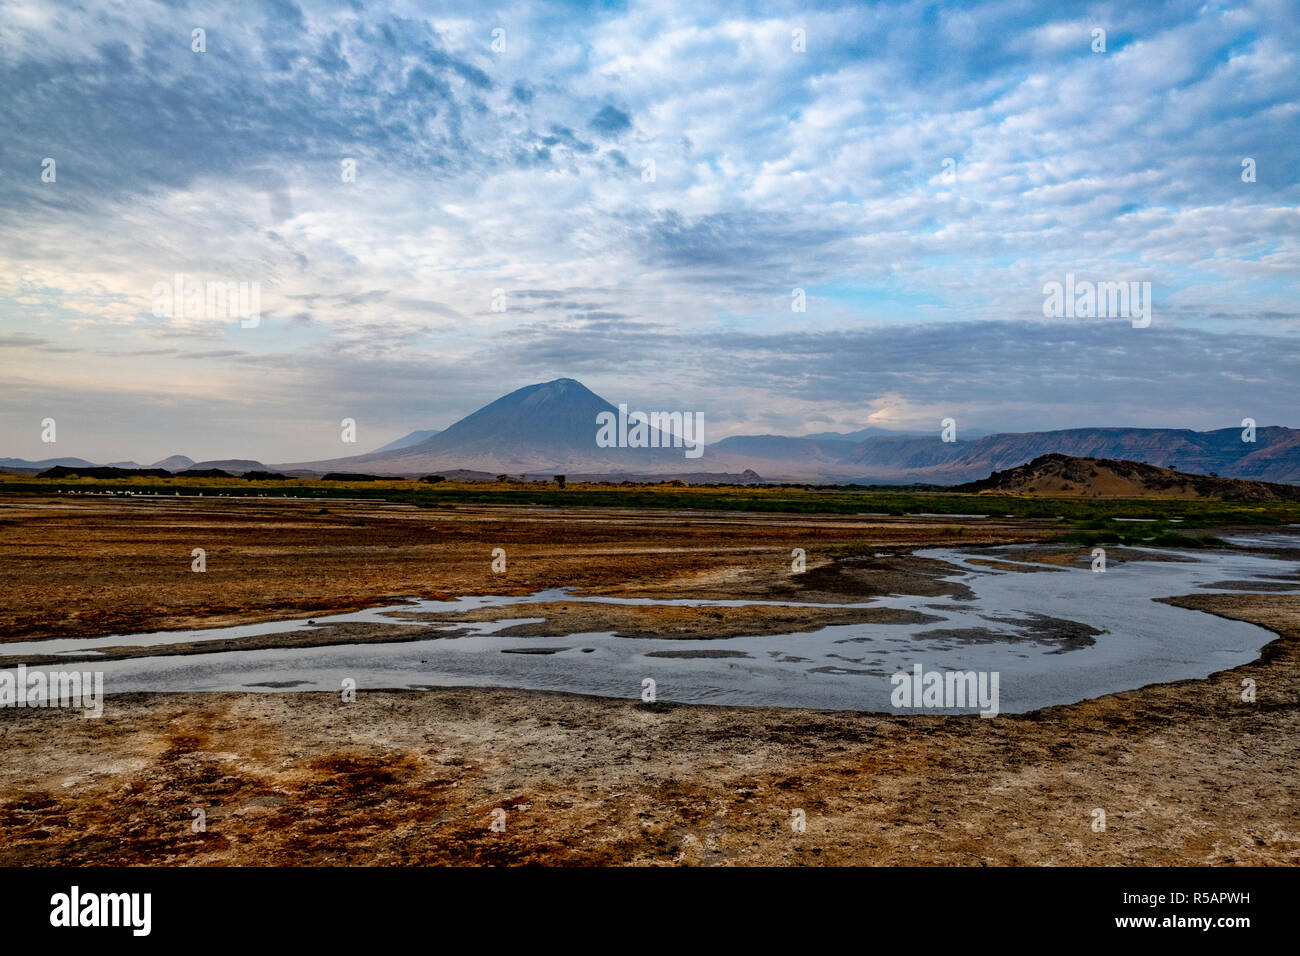 The 'Mountain of God' (Masai language Ol Doinyo Lengai) active volcano on the southern shores of Lake Natron in the Arusha area of northern Tanzania Stock Photo